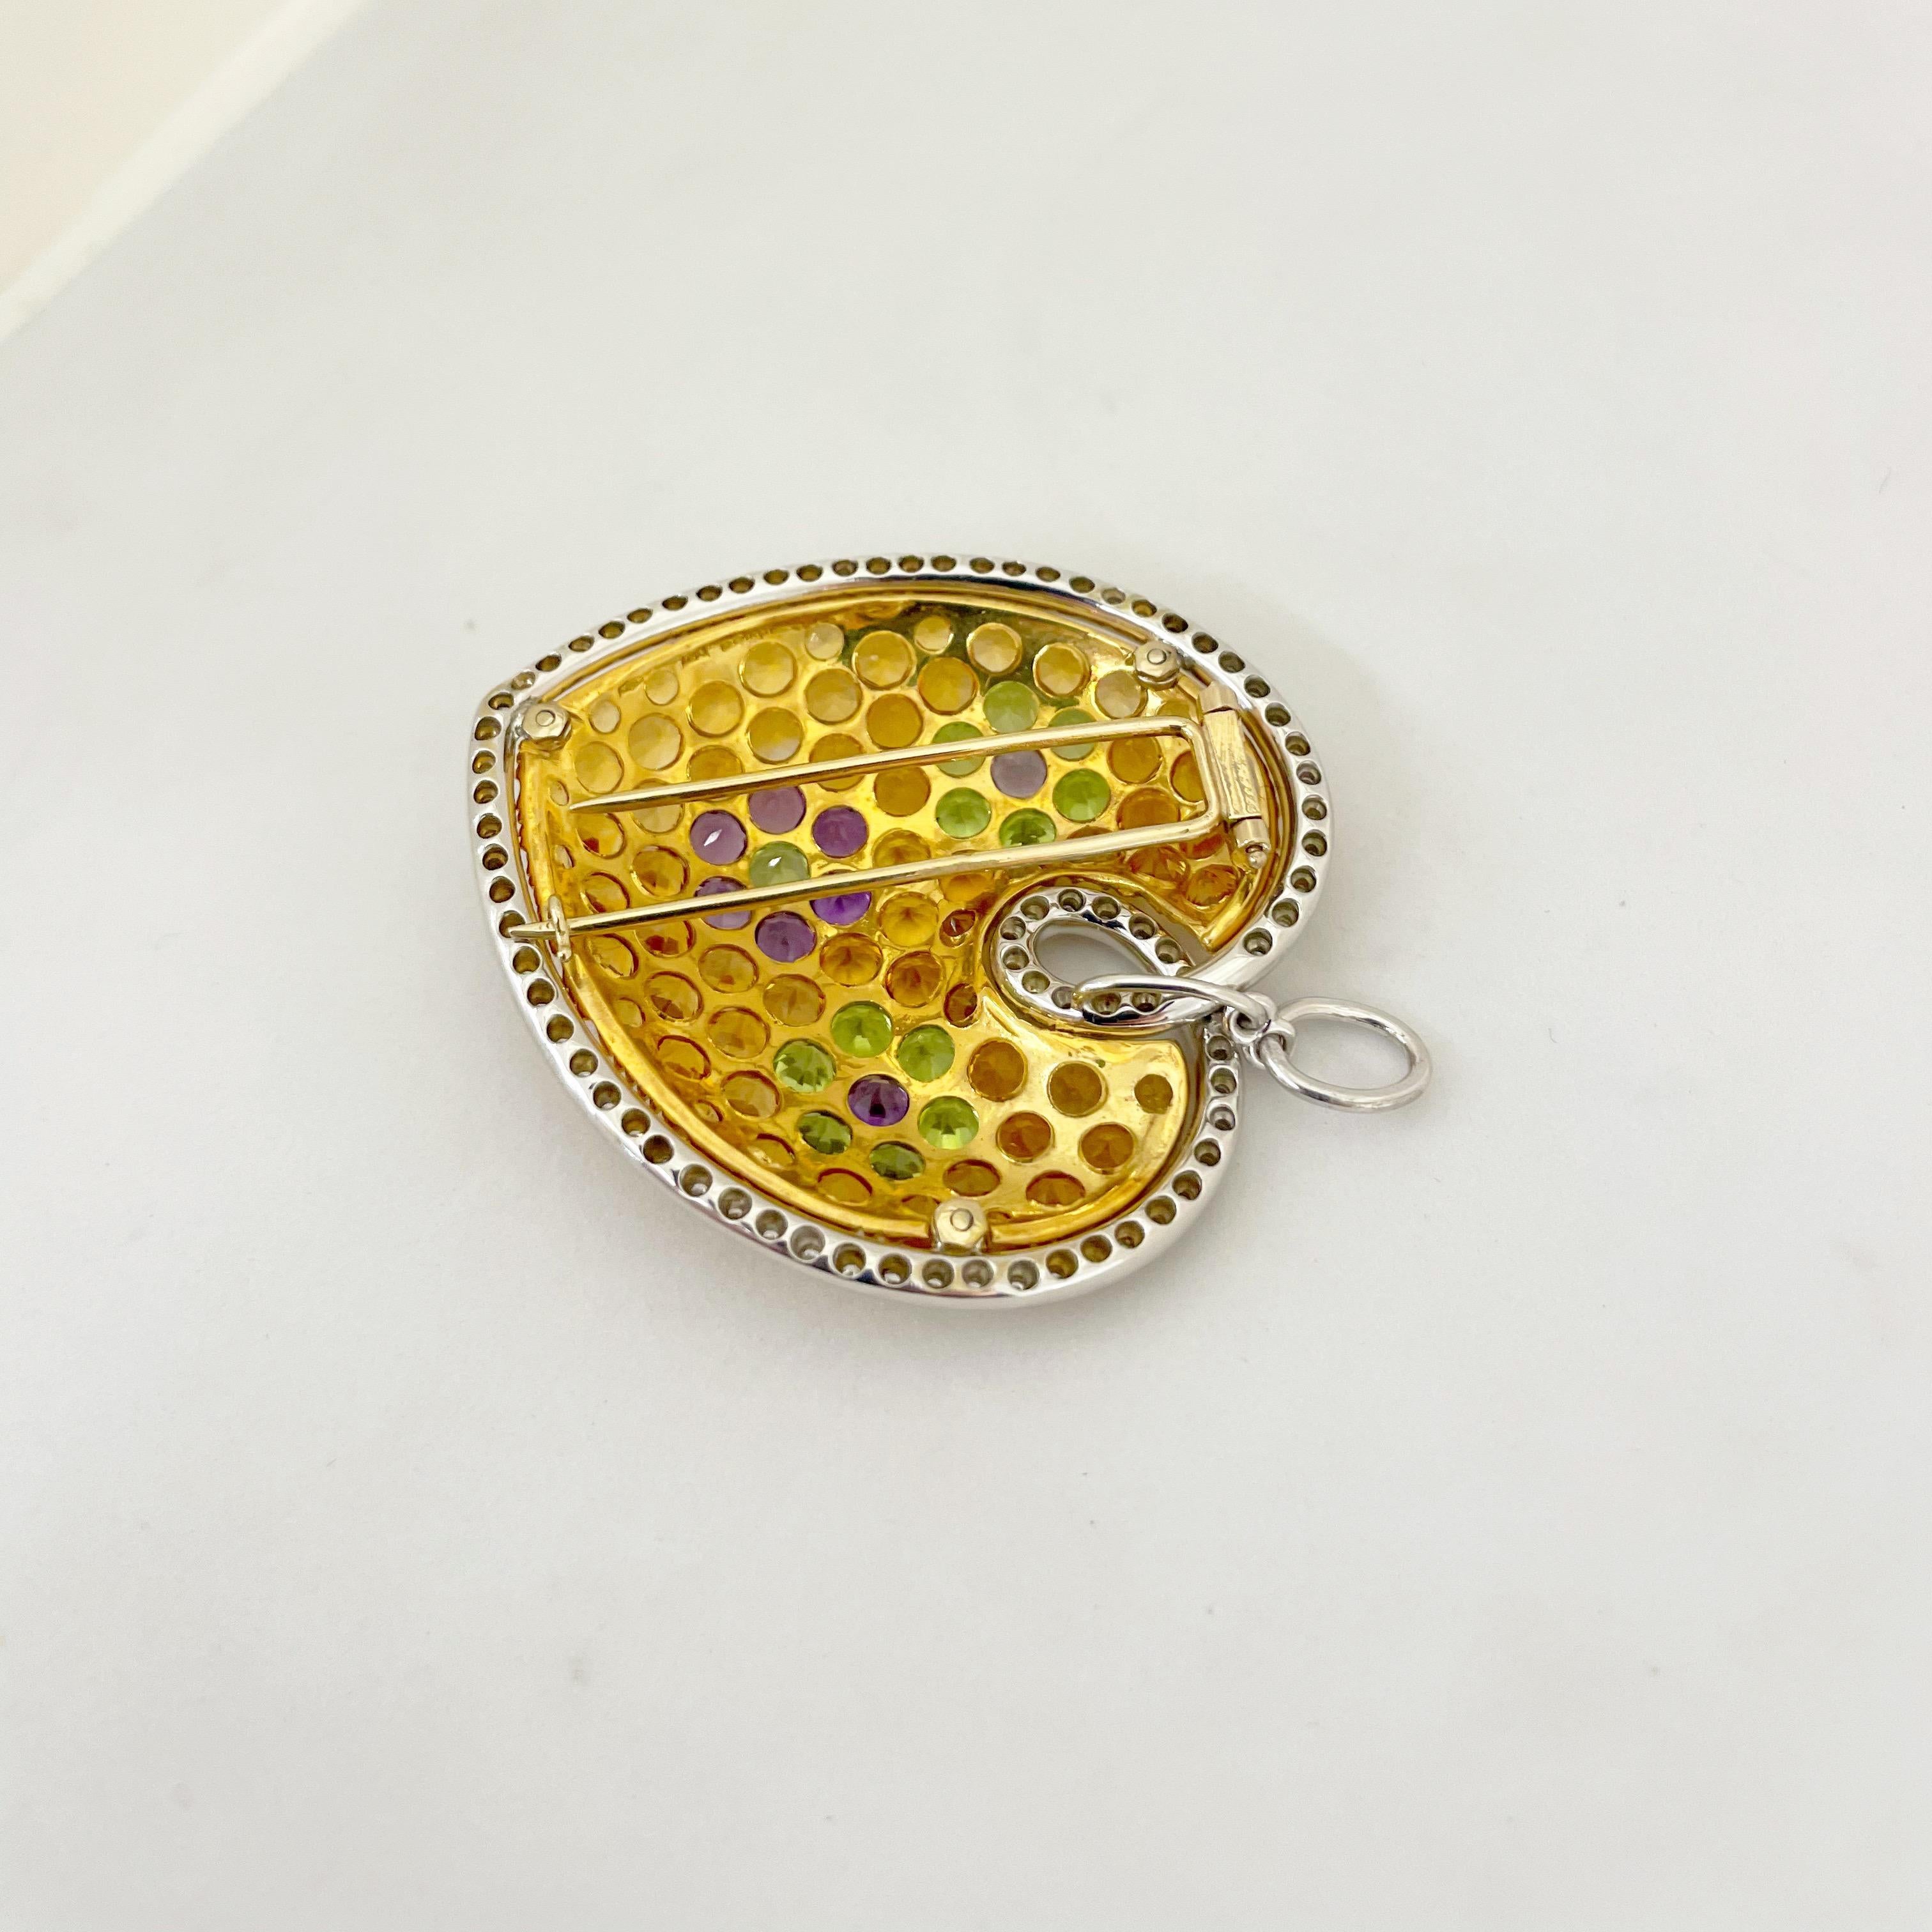 Women's or Men's 18KT Yellow and White Gold Semi-Precious Stone Puffed Heart Brooch with Diamonds For Sale